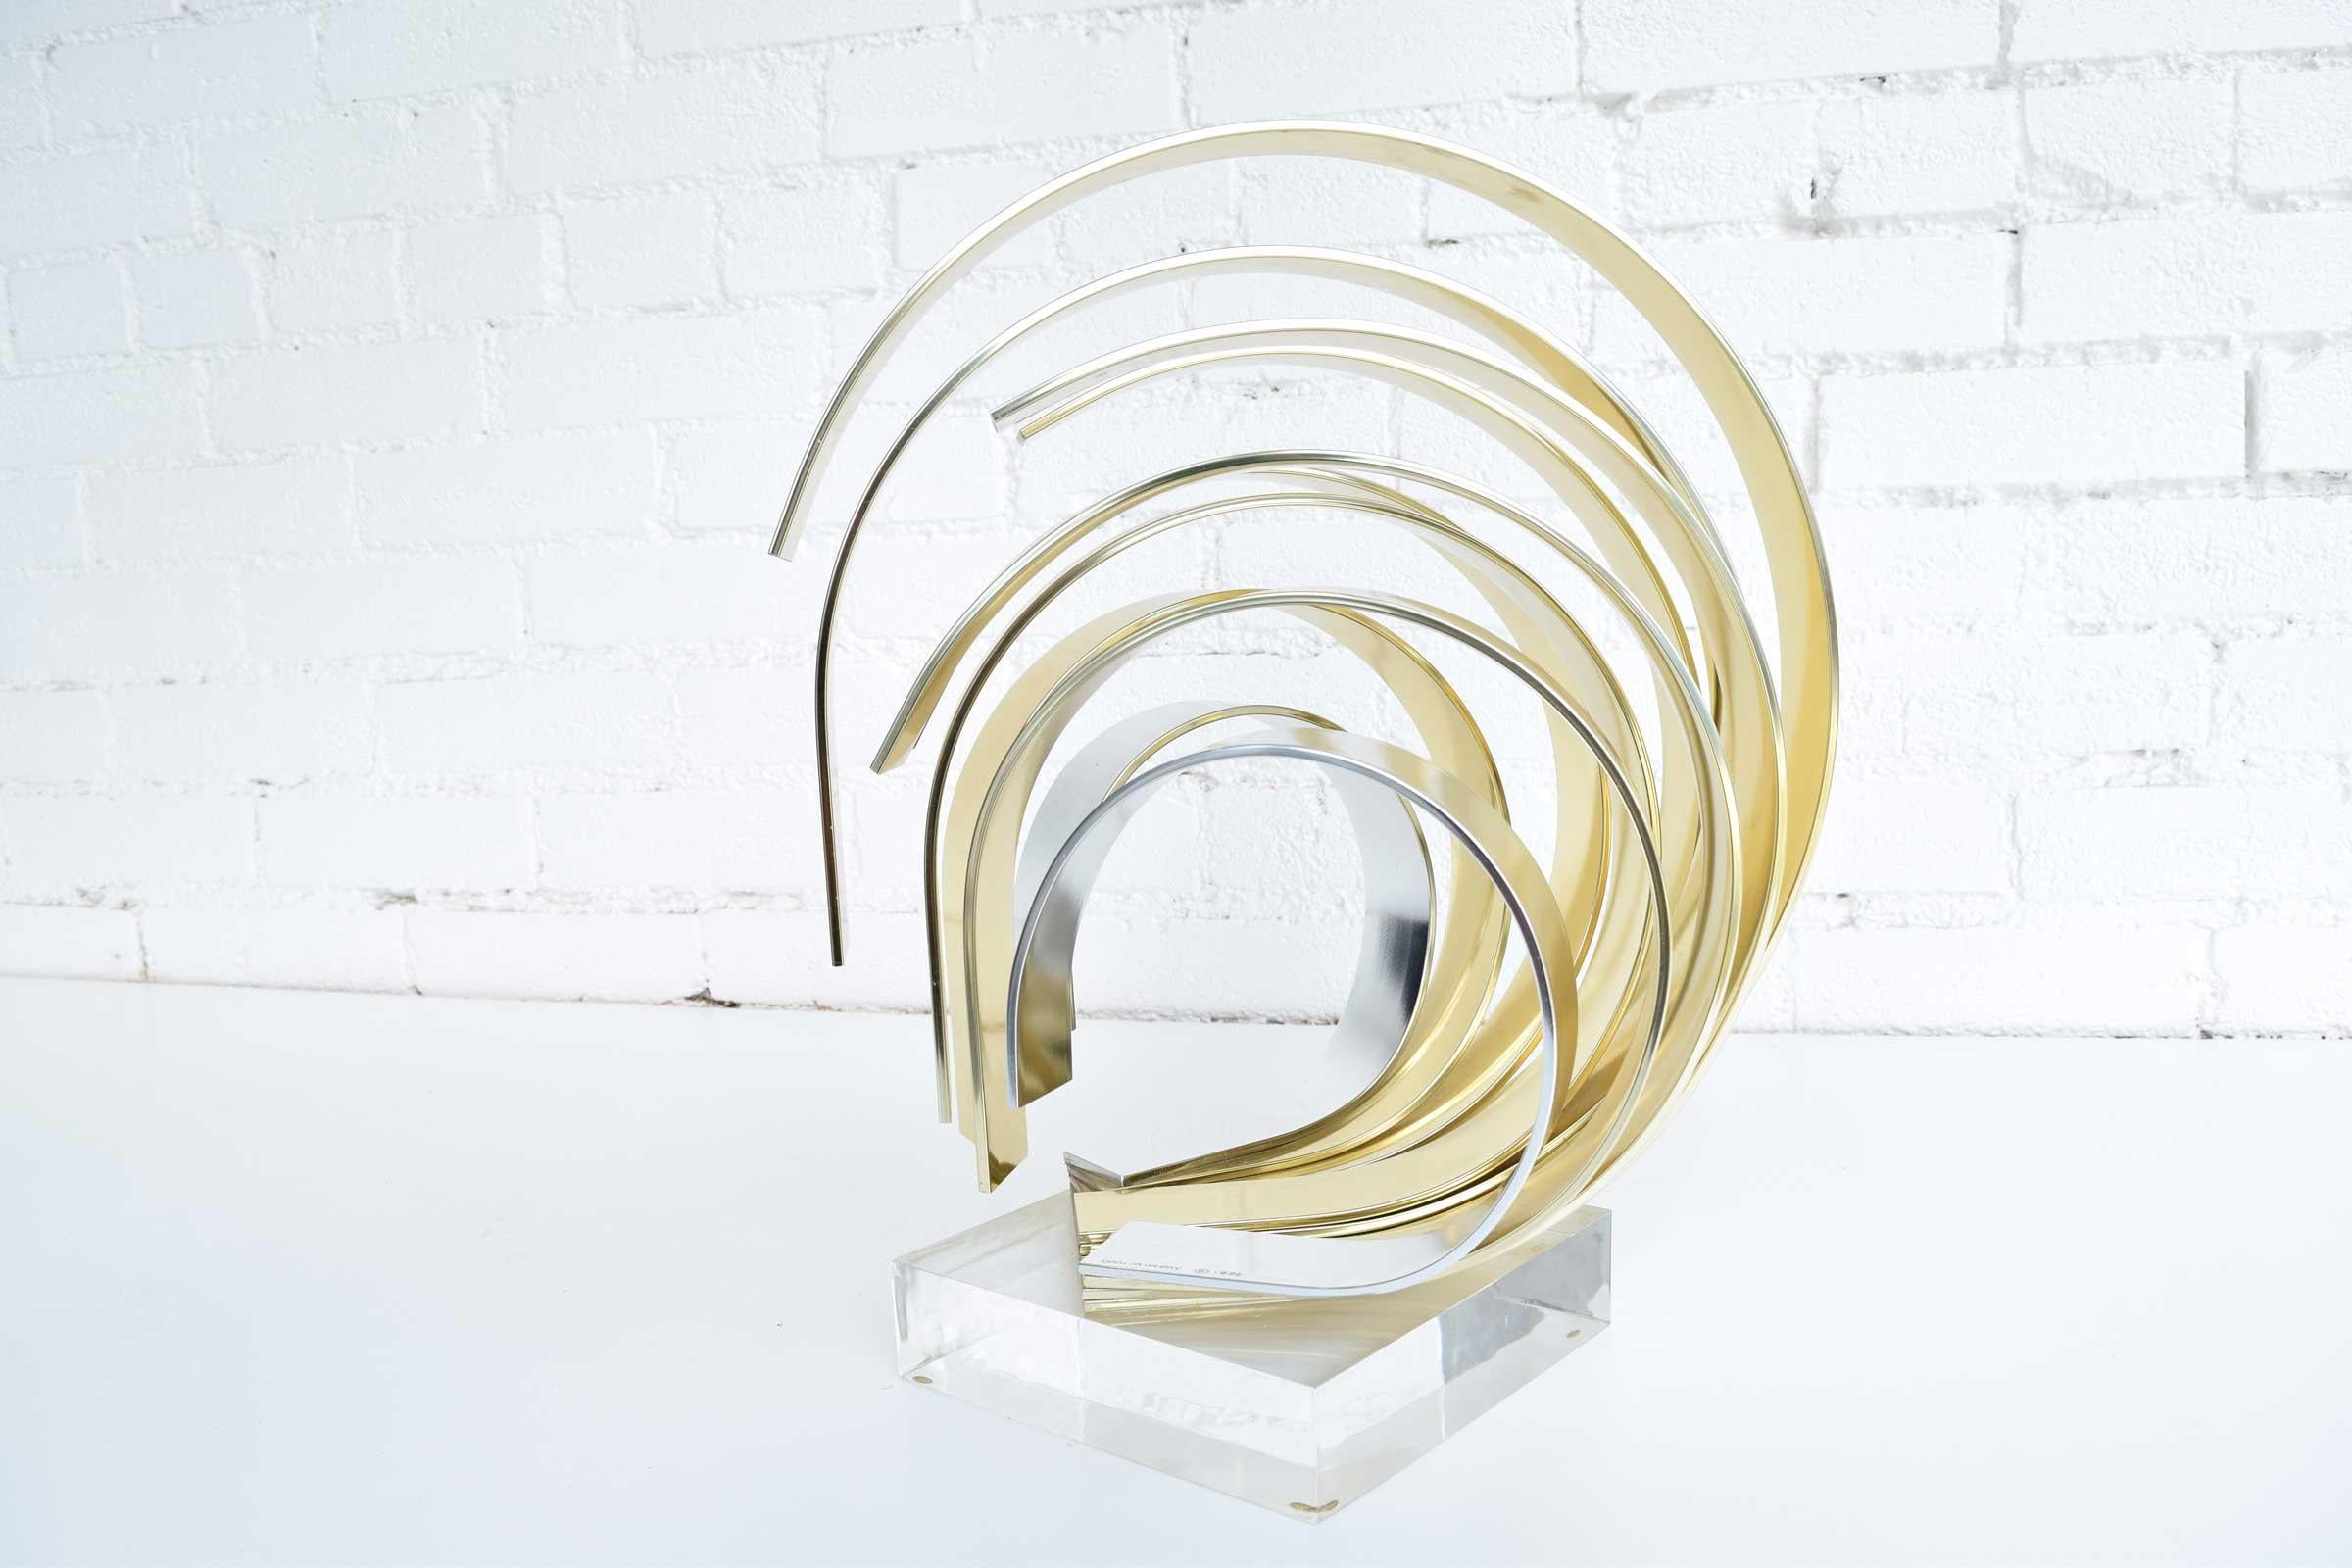 Dan Murphy signed and dated 1991. Aluminum ribbon sculpture, coated half in silver and half in gold, mounted on Lucite base. Measures: 15.5